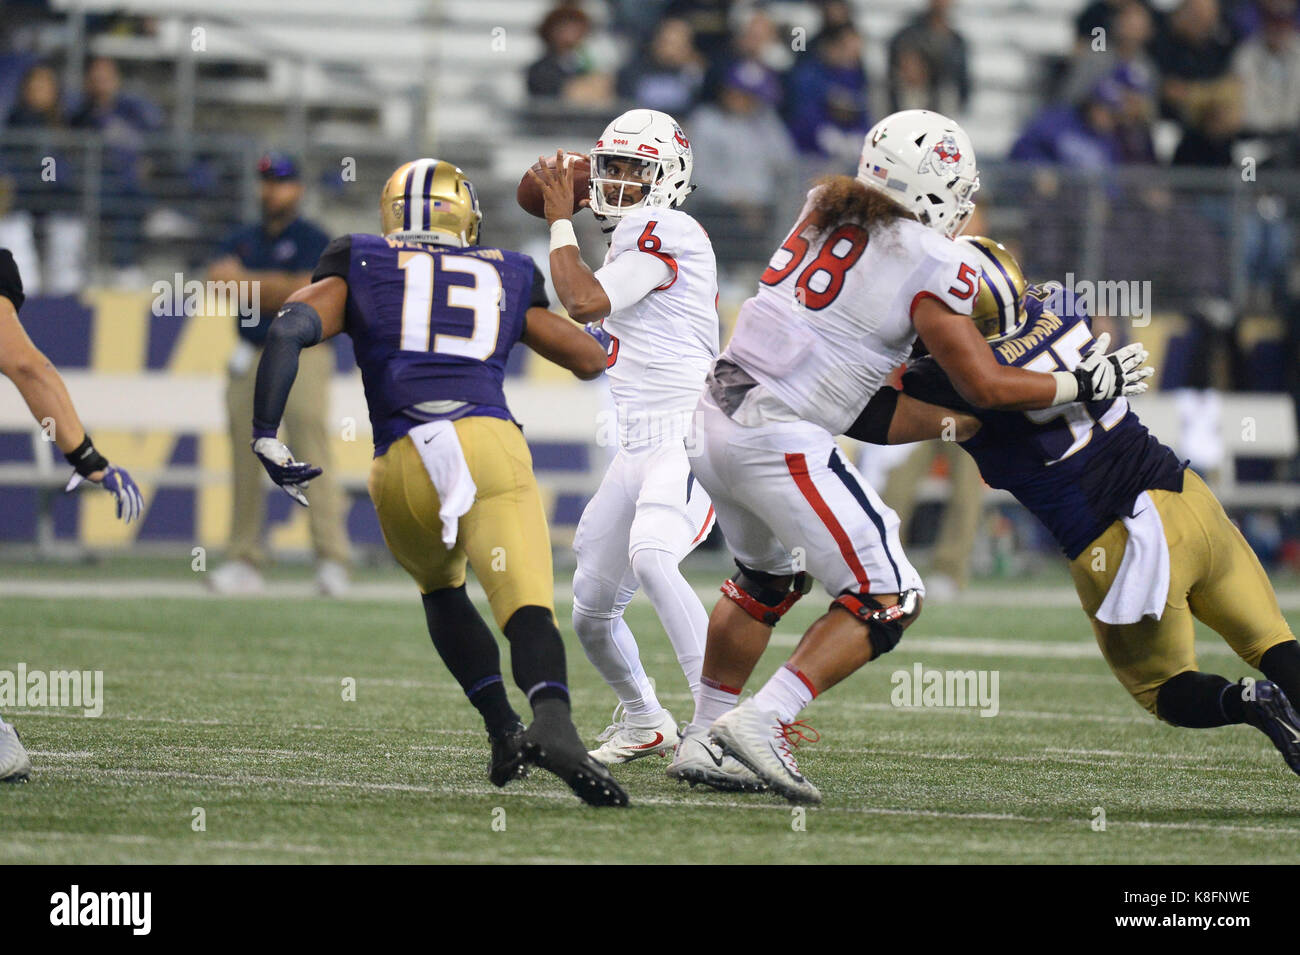 Seattle, WA, USA. 16th Sep, 2017. Fresno State quarterback Marcus McMaryion (6) looks to throw under pressure during a NCAA football game between the Fresno State Bulldogs and the Washington Huskies. The game was played at Husky Stadium in Seattle, WA. Jeff Halstead/CSM/Alamy Live News Stock Photo